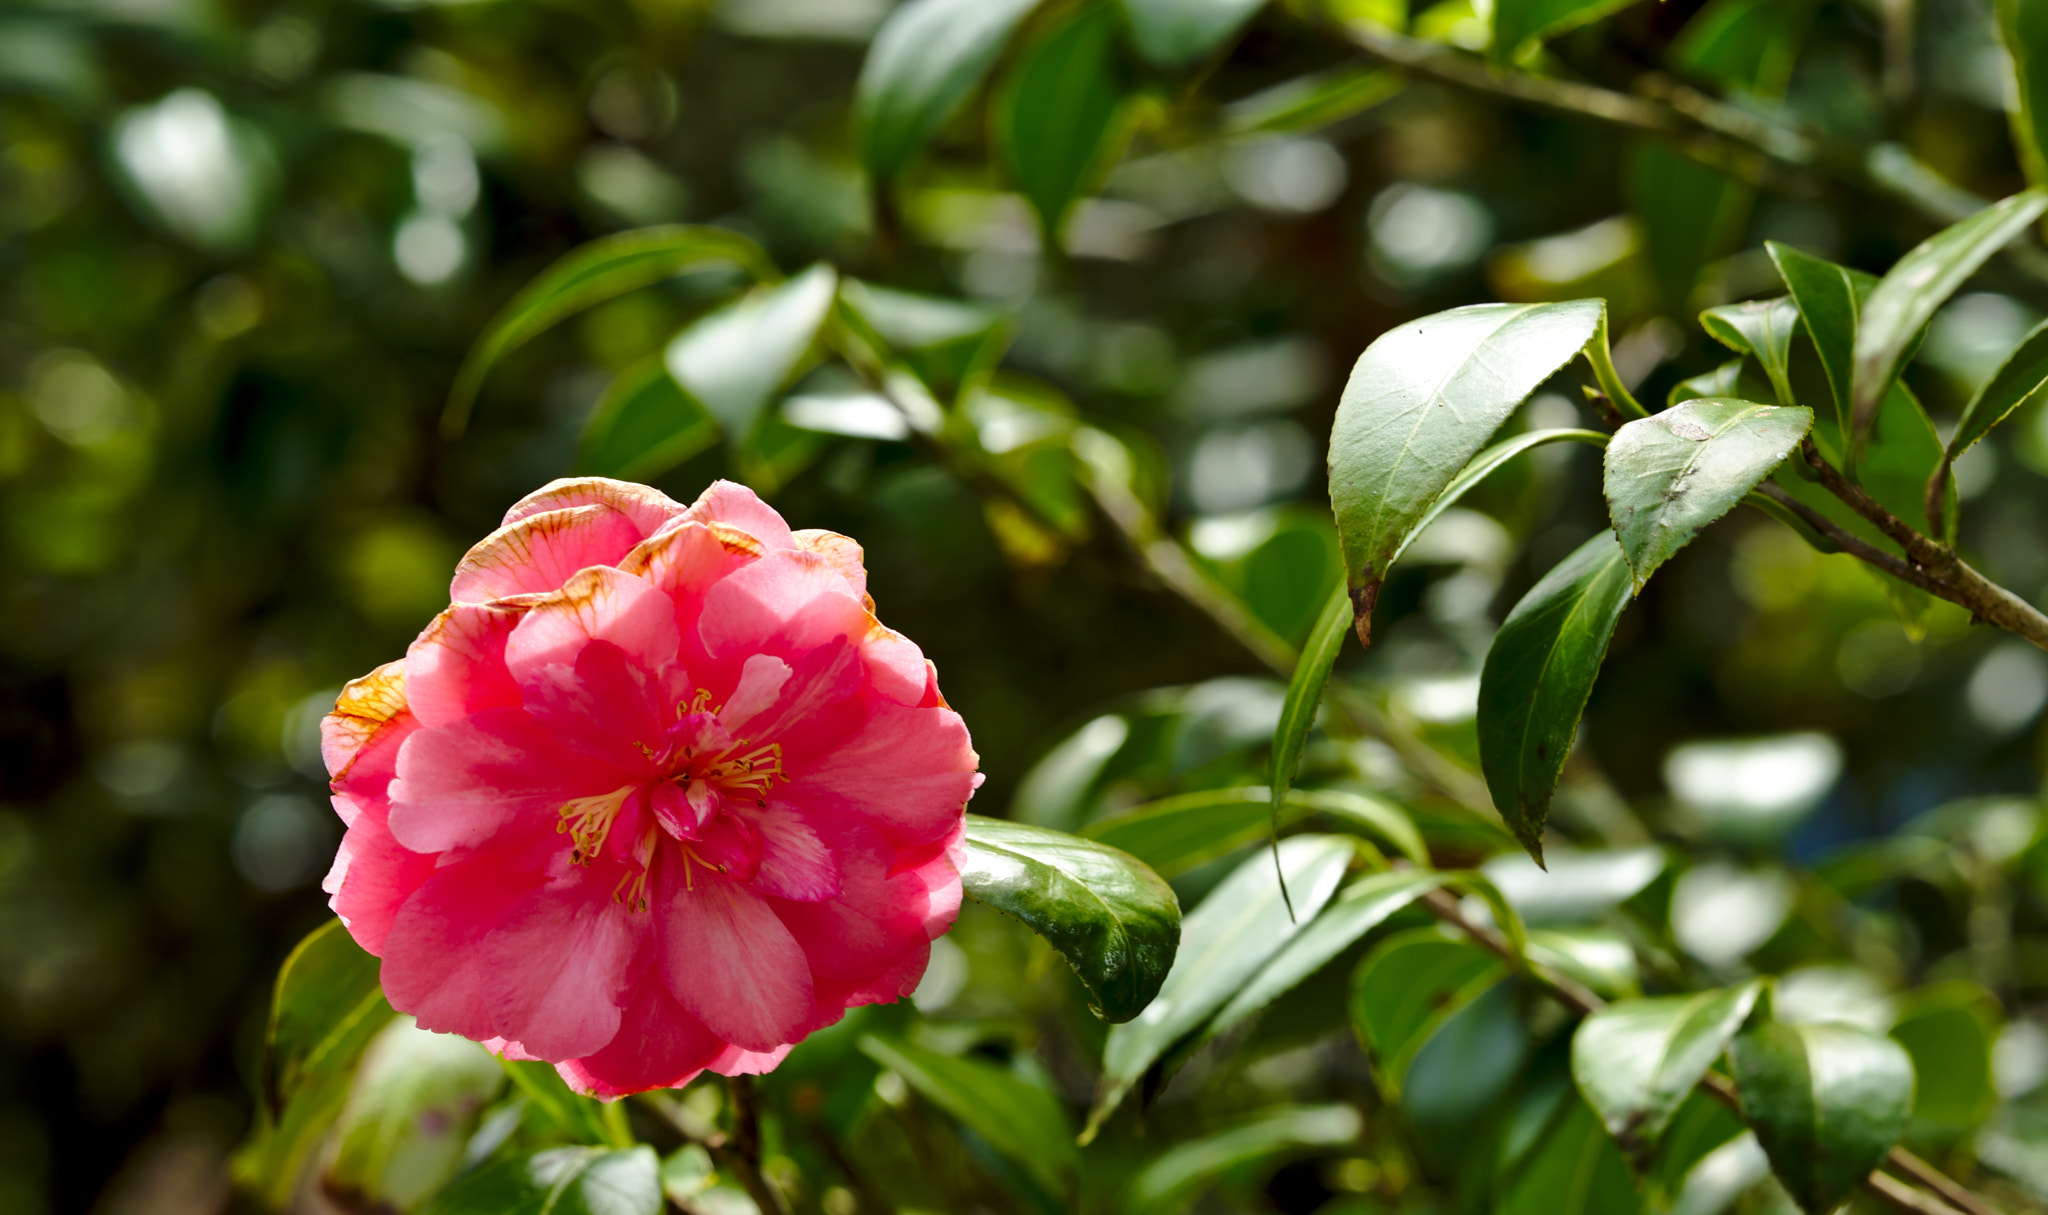 ZEISS Otus 85mm F1.4 sample photo. "t. s. clover jr." or camellia japonica photography